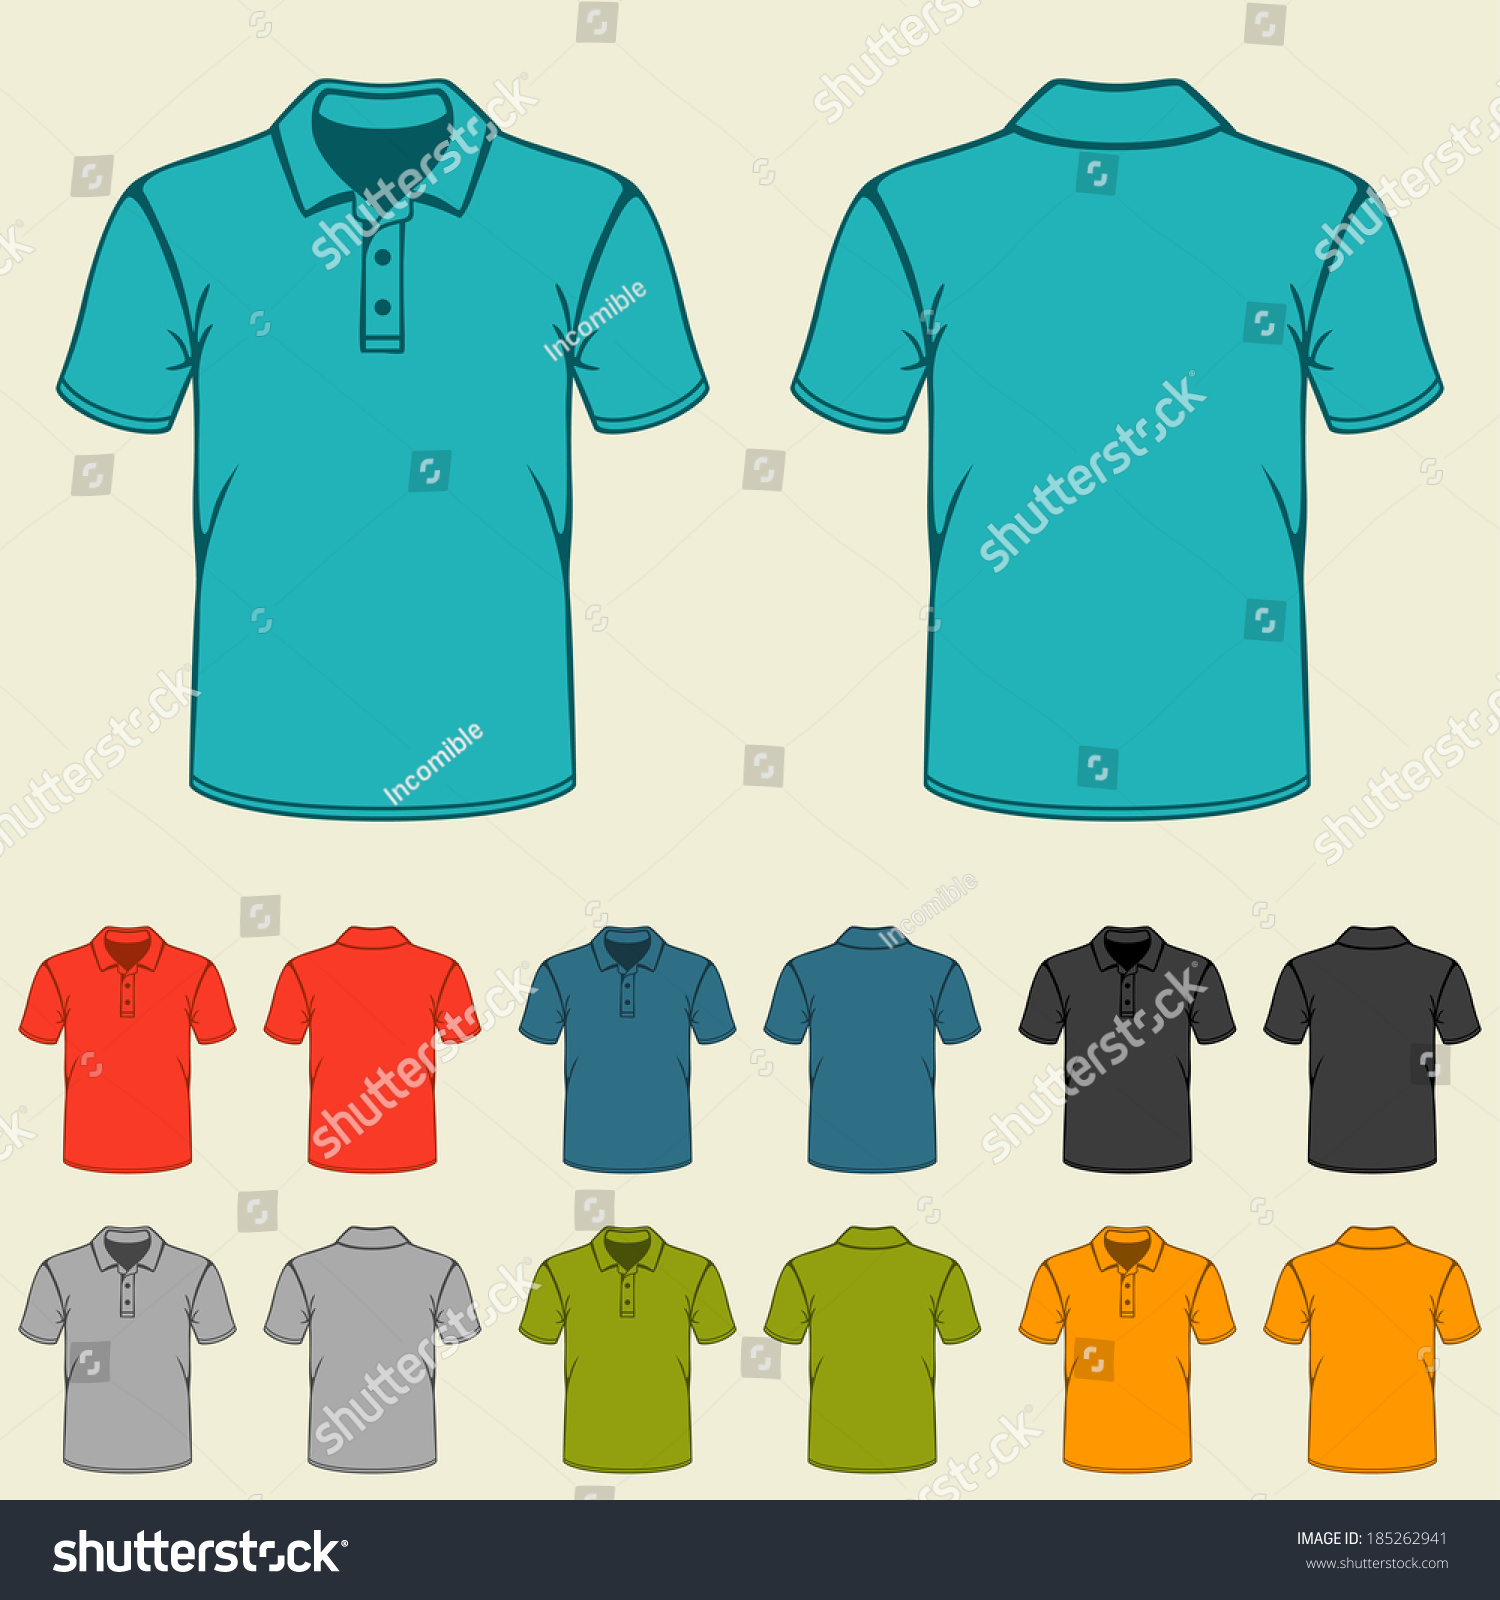 Set Of Templates Colored Polo Shirts For Men. Stock Vector Illustration ...